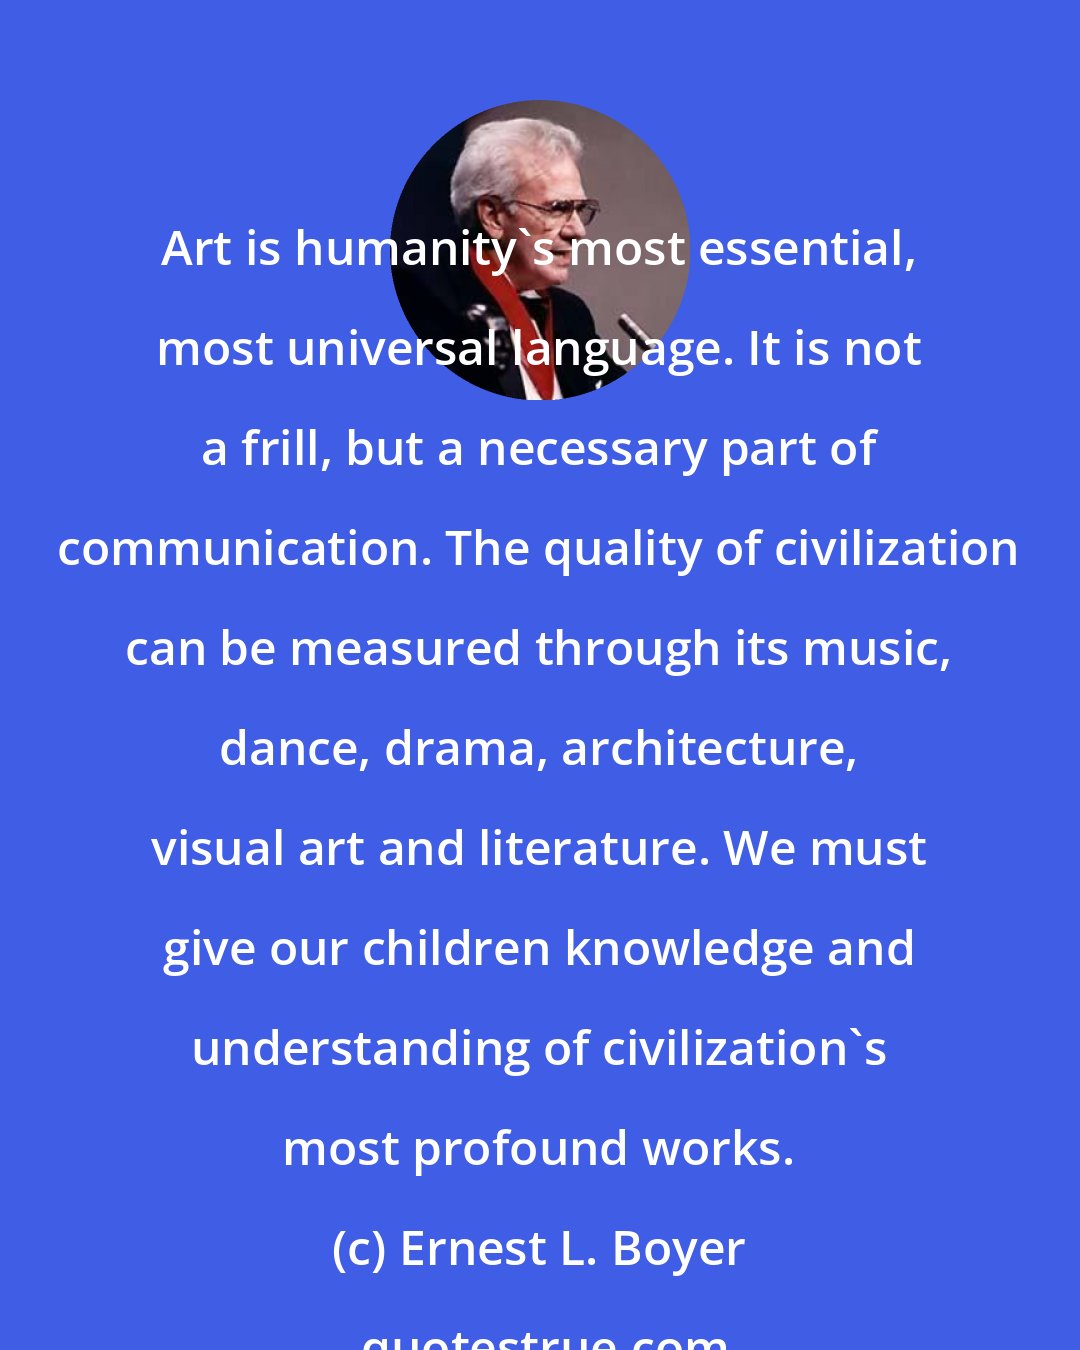 Ernest L. Boyer: Art is humanity's most essential, most universal language. It is not a frill, but a necessary part of communication. The quality of civilization can be measured through its music, dance, drama, architecture, visual art and literature. We must give our children knowledge and understanding of civilization's most profound works.